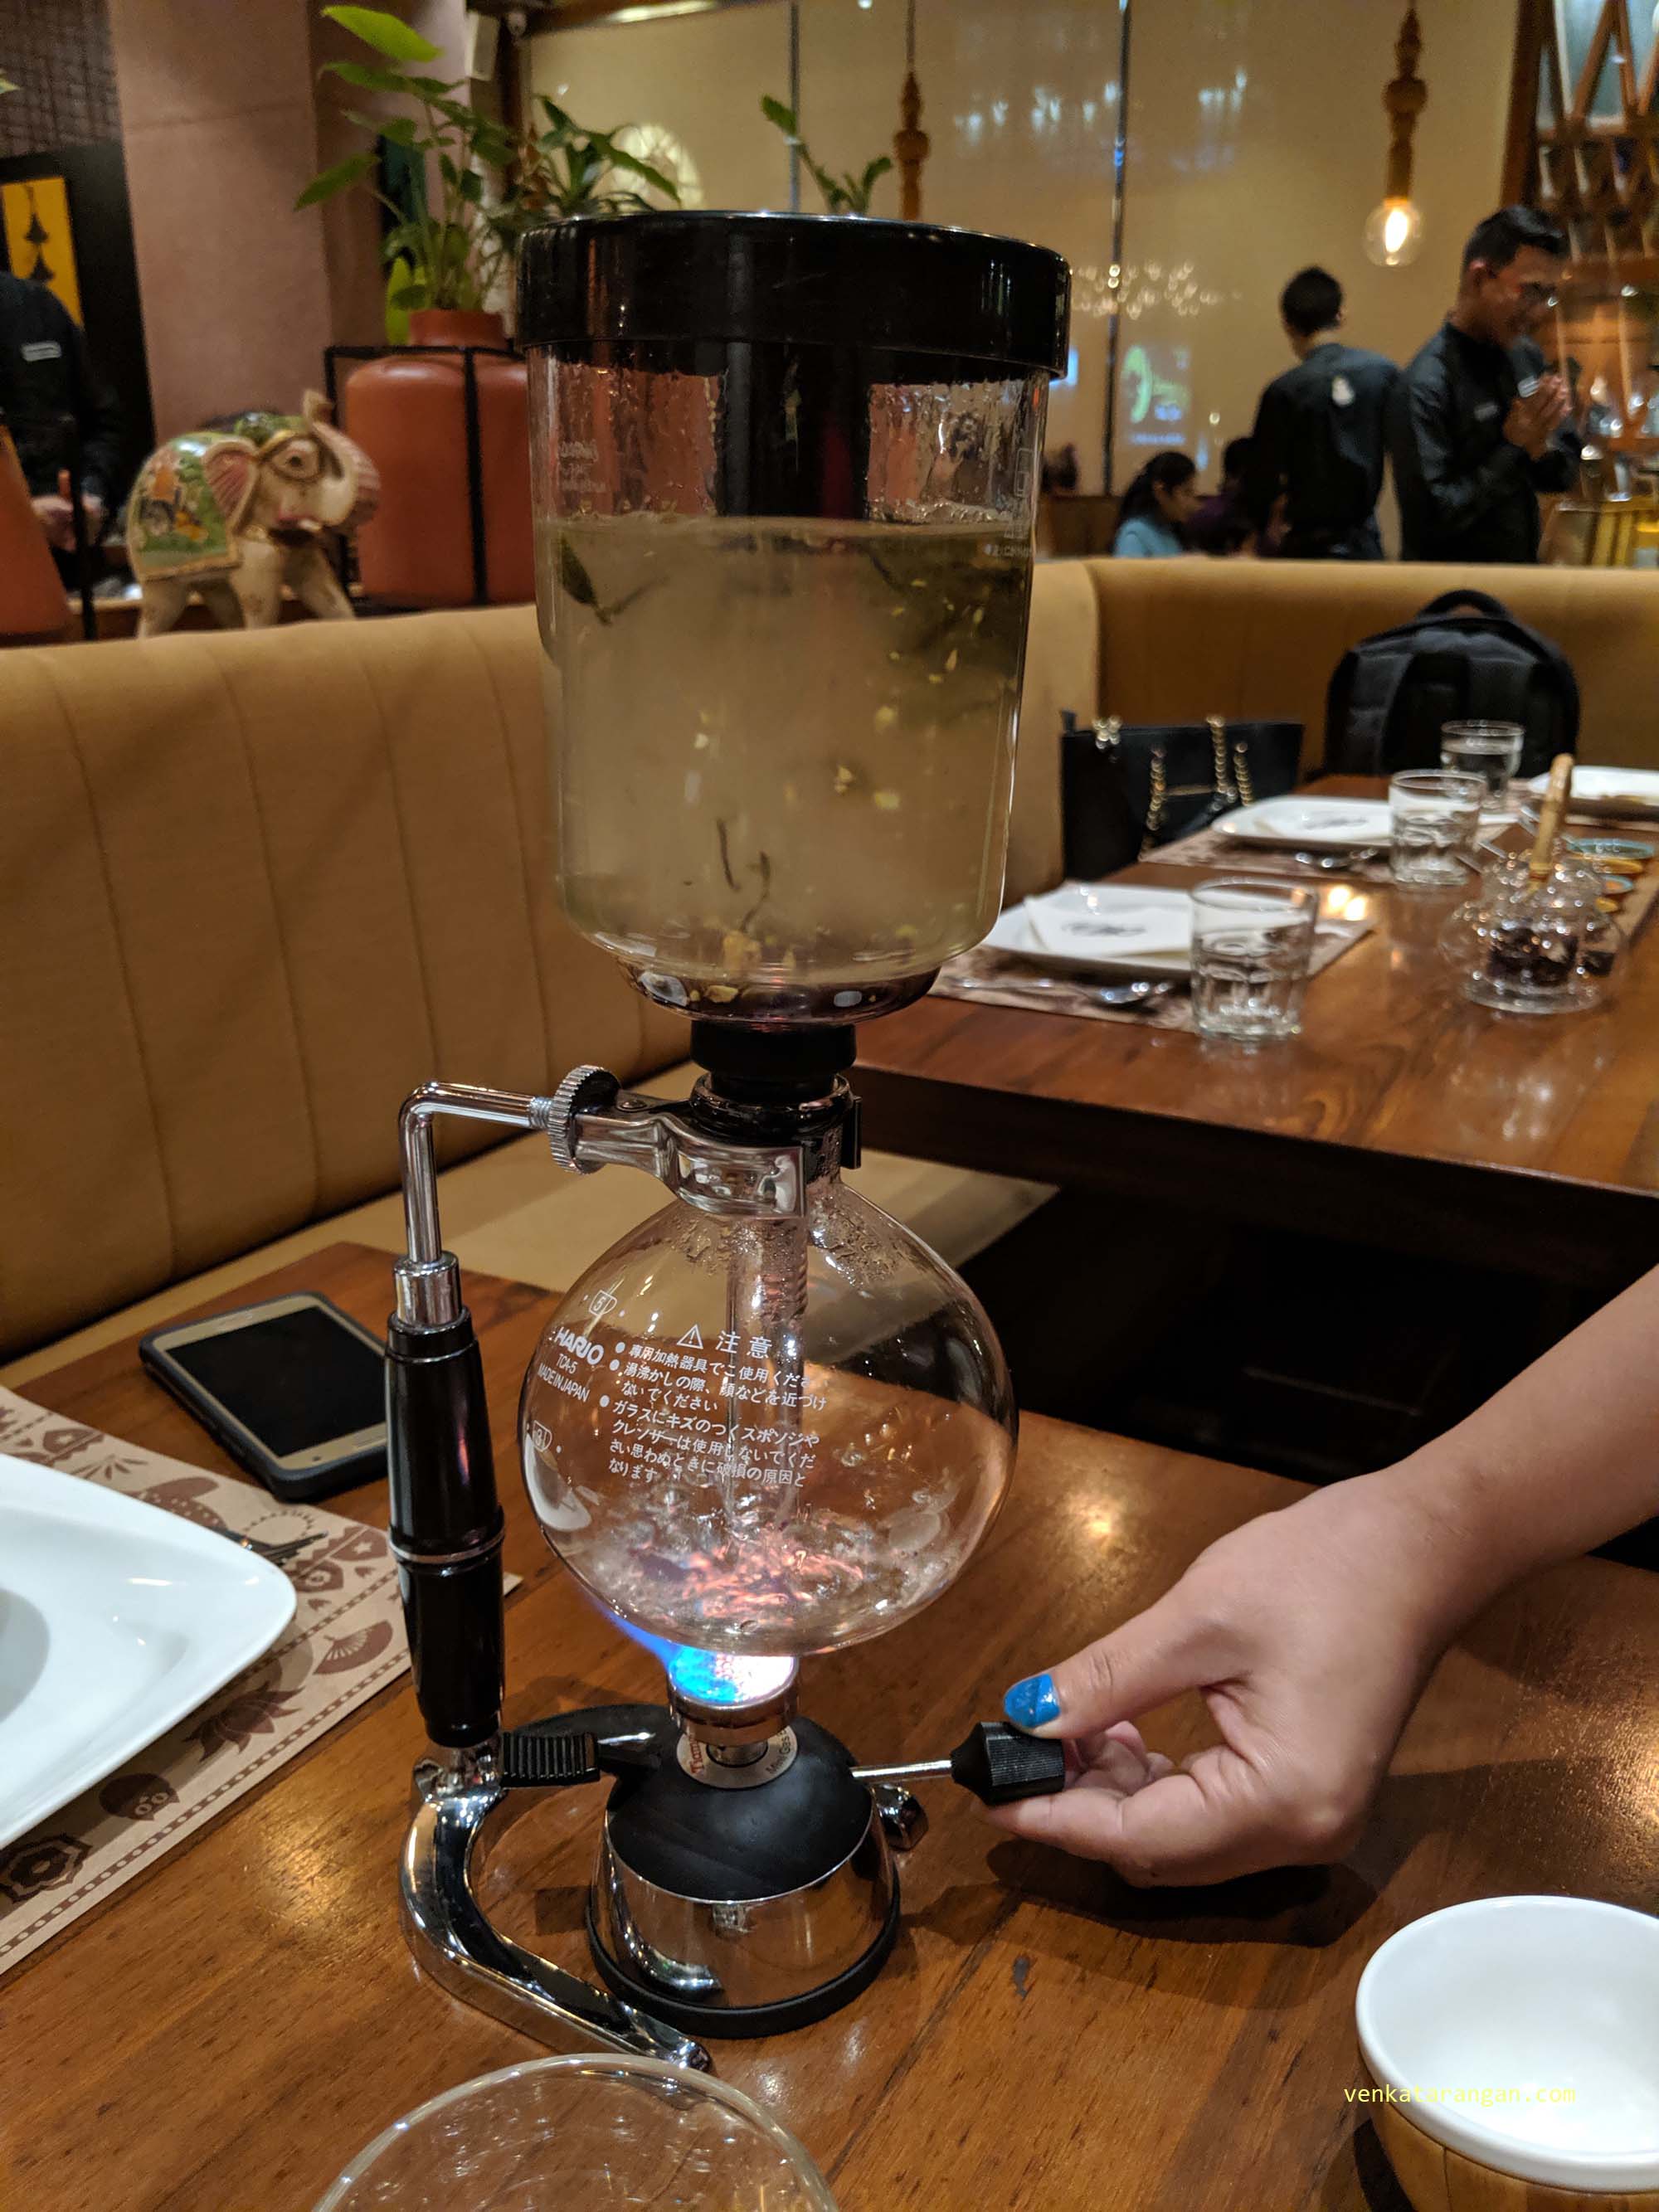 It was interesting to watch the brewing of tea in their special apparatus from Japan - Signature BB blend is made with hand picked premium white tea, the bursts of flavors of peaches and oranges.